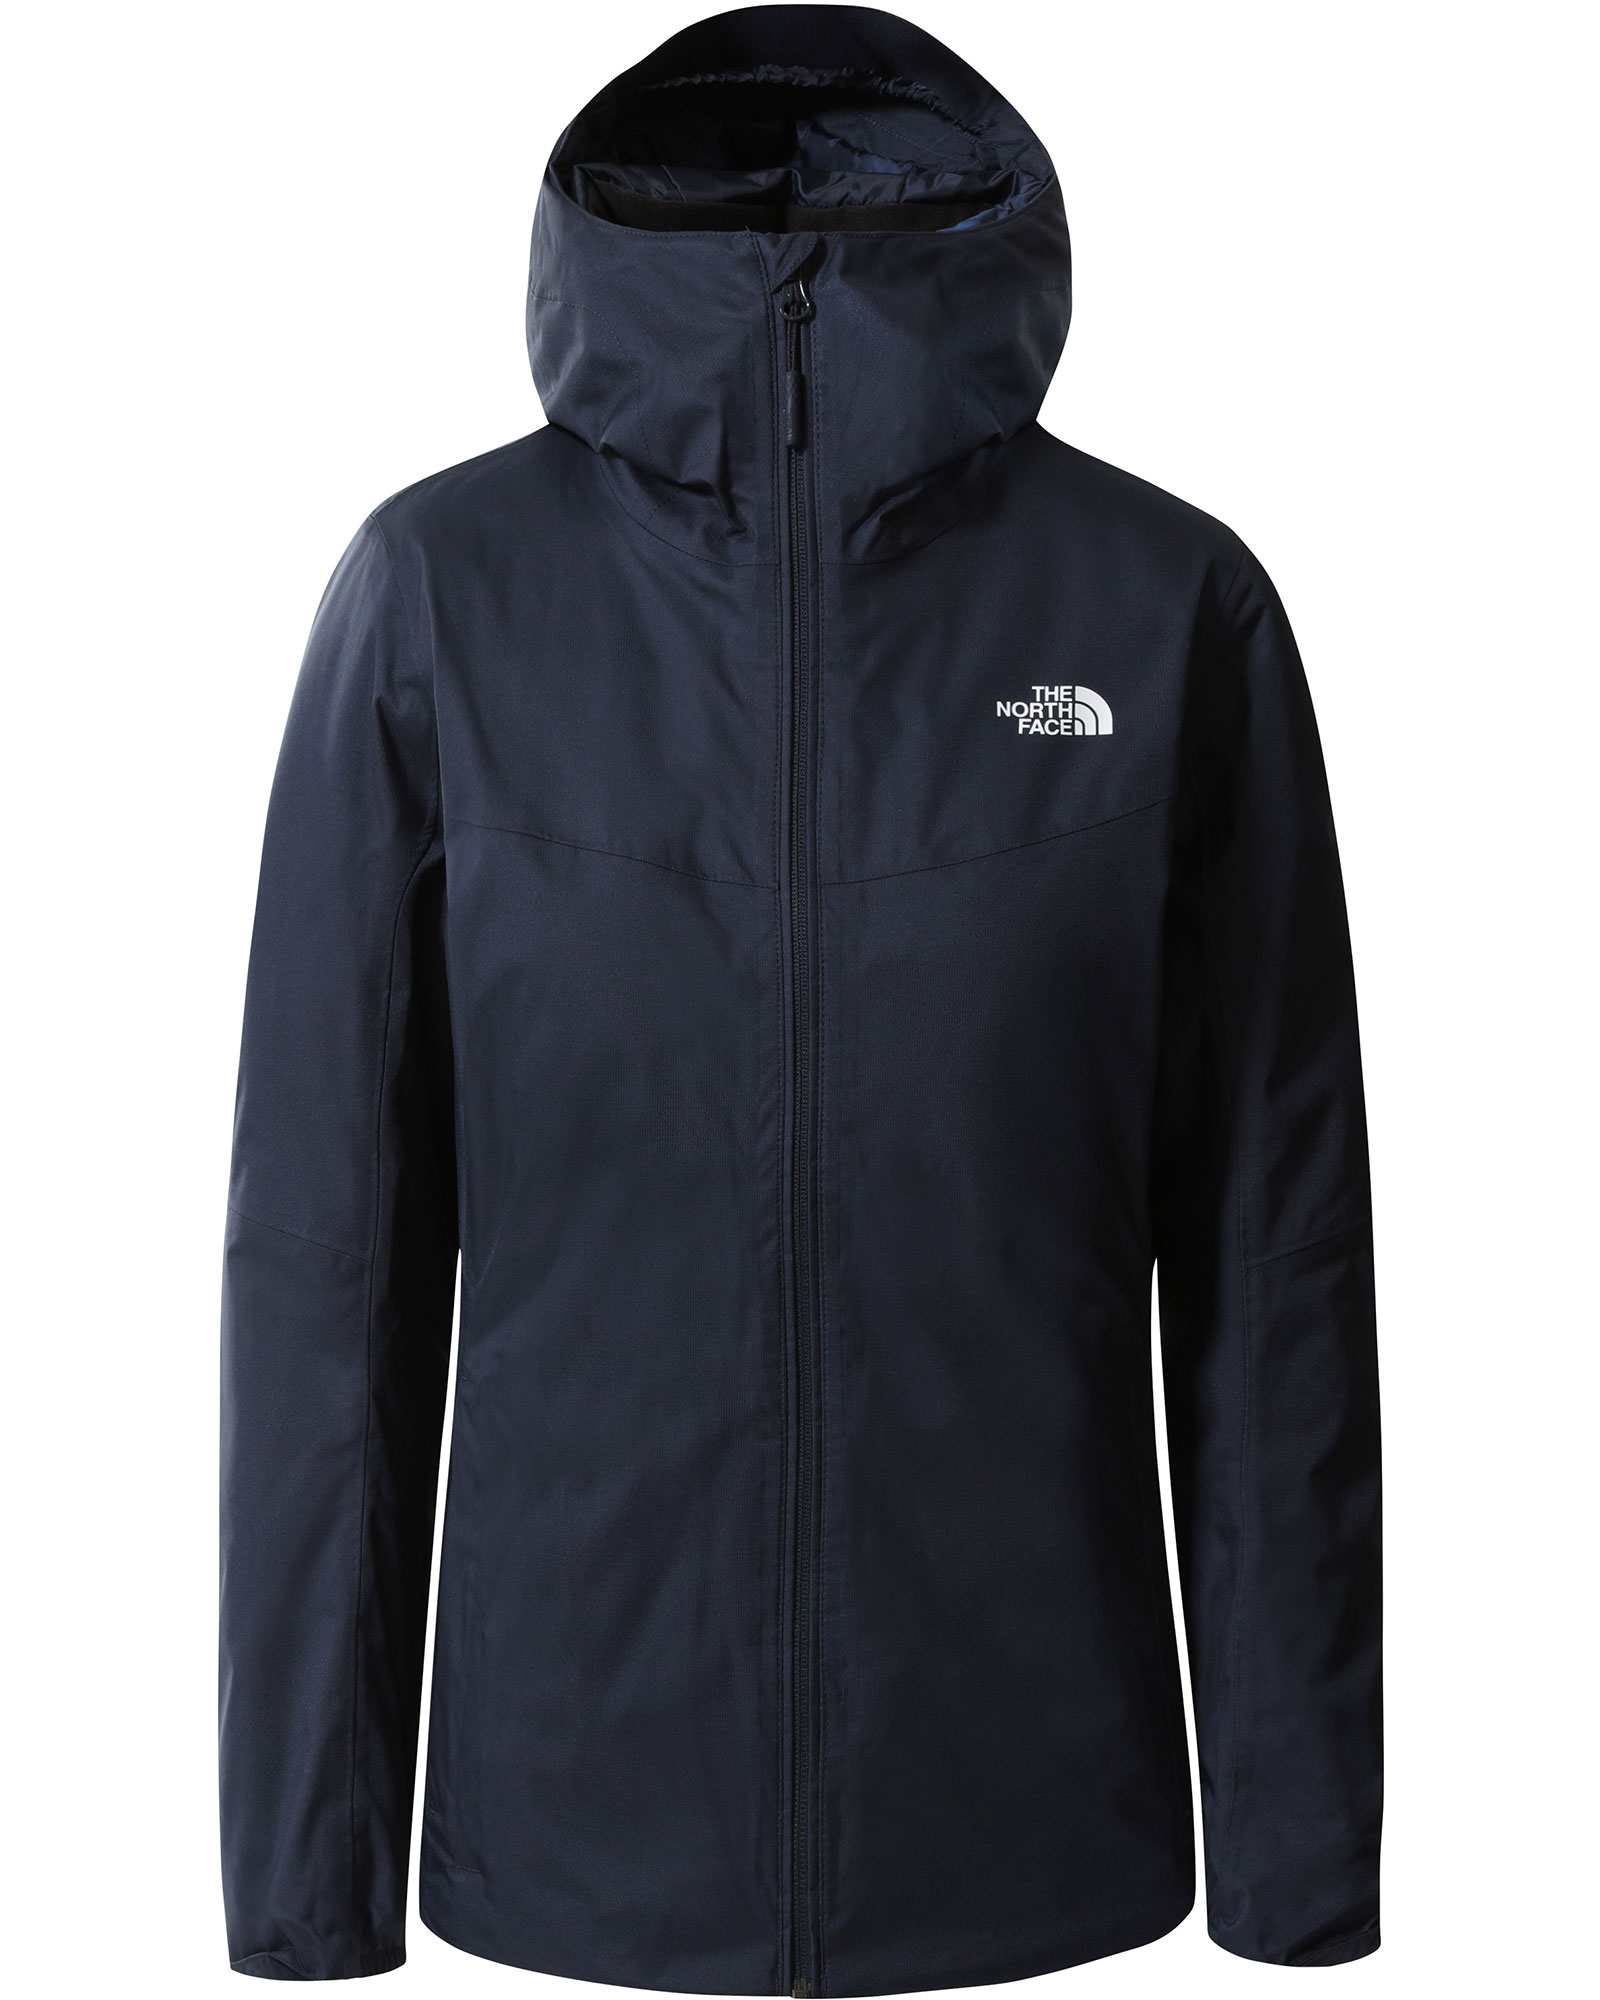 The North Face Quest DryVent Women’s Insulated Jacket - Urban Navy L